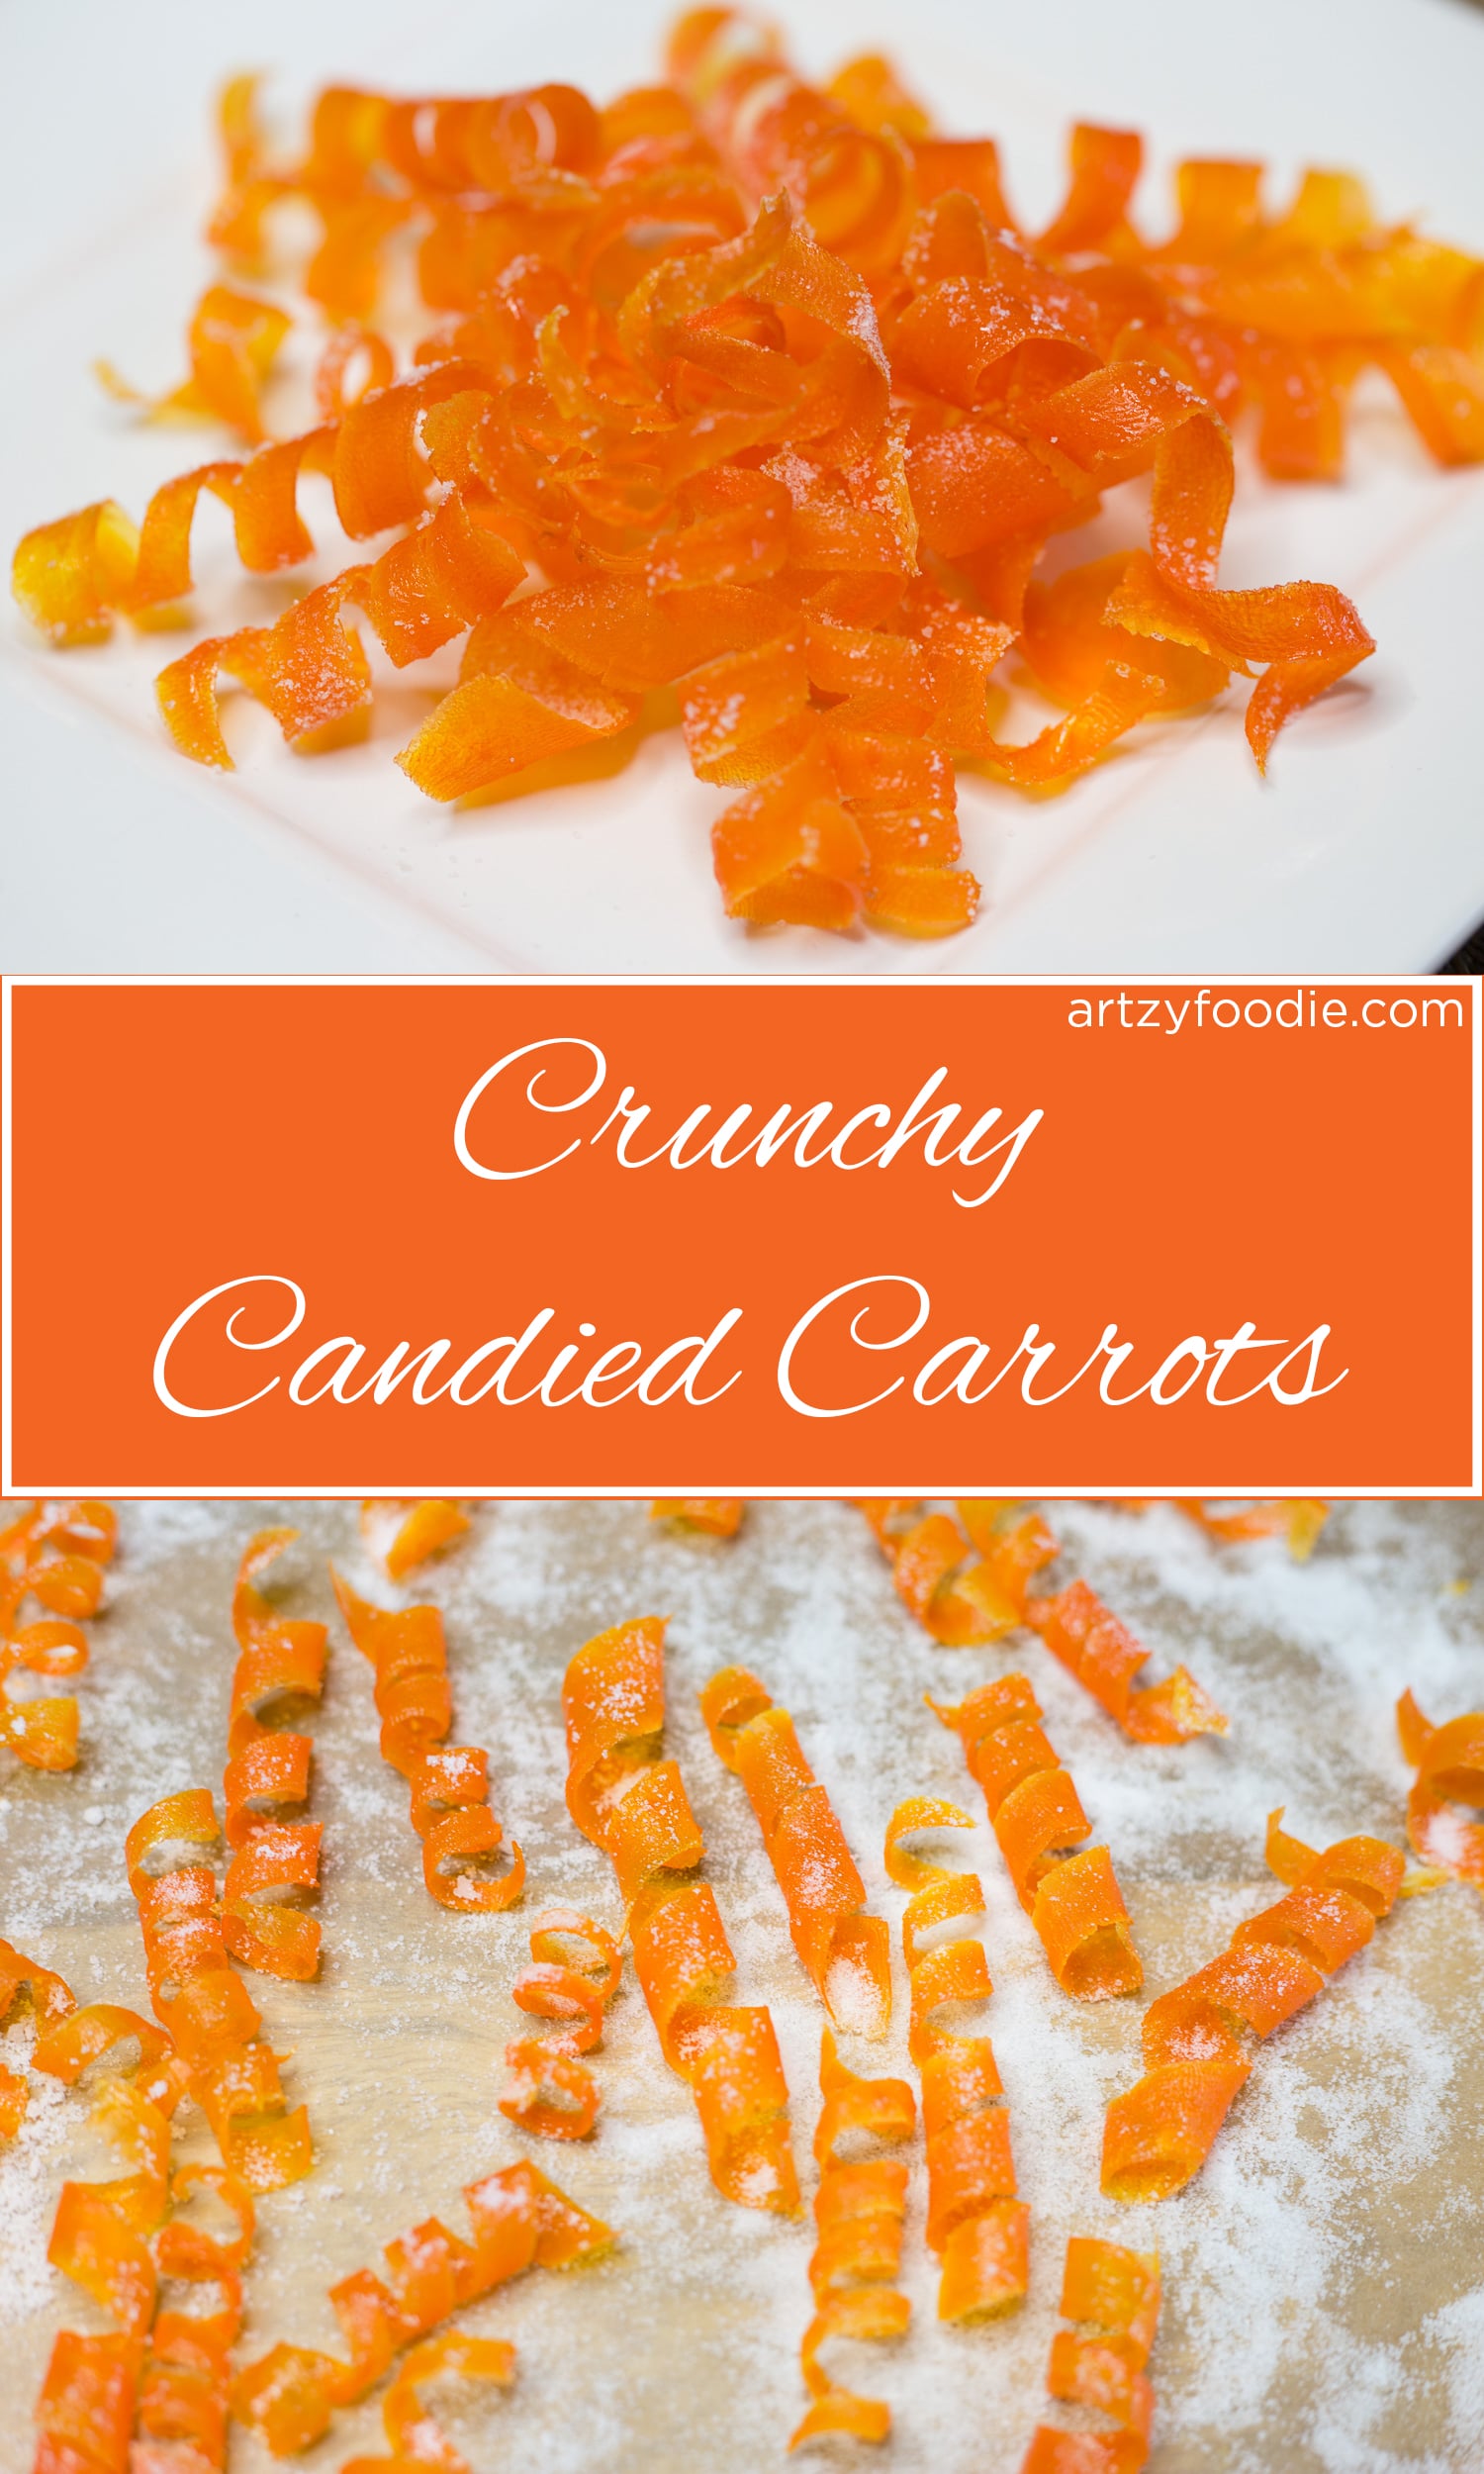 Candied carrots are as much fun to make as they are to eat! These super cute candied carrot curls have been boiled in sugar water, baked, and dusted with even more sugar! |artzyfoodie.com|